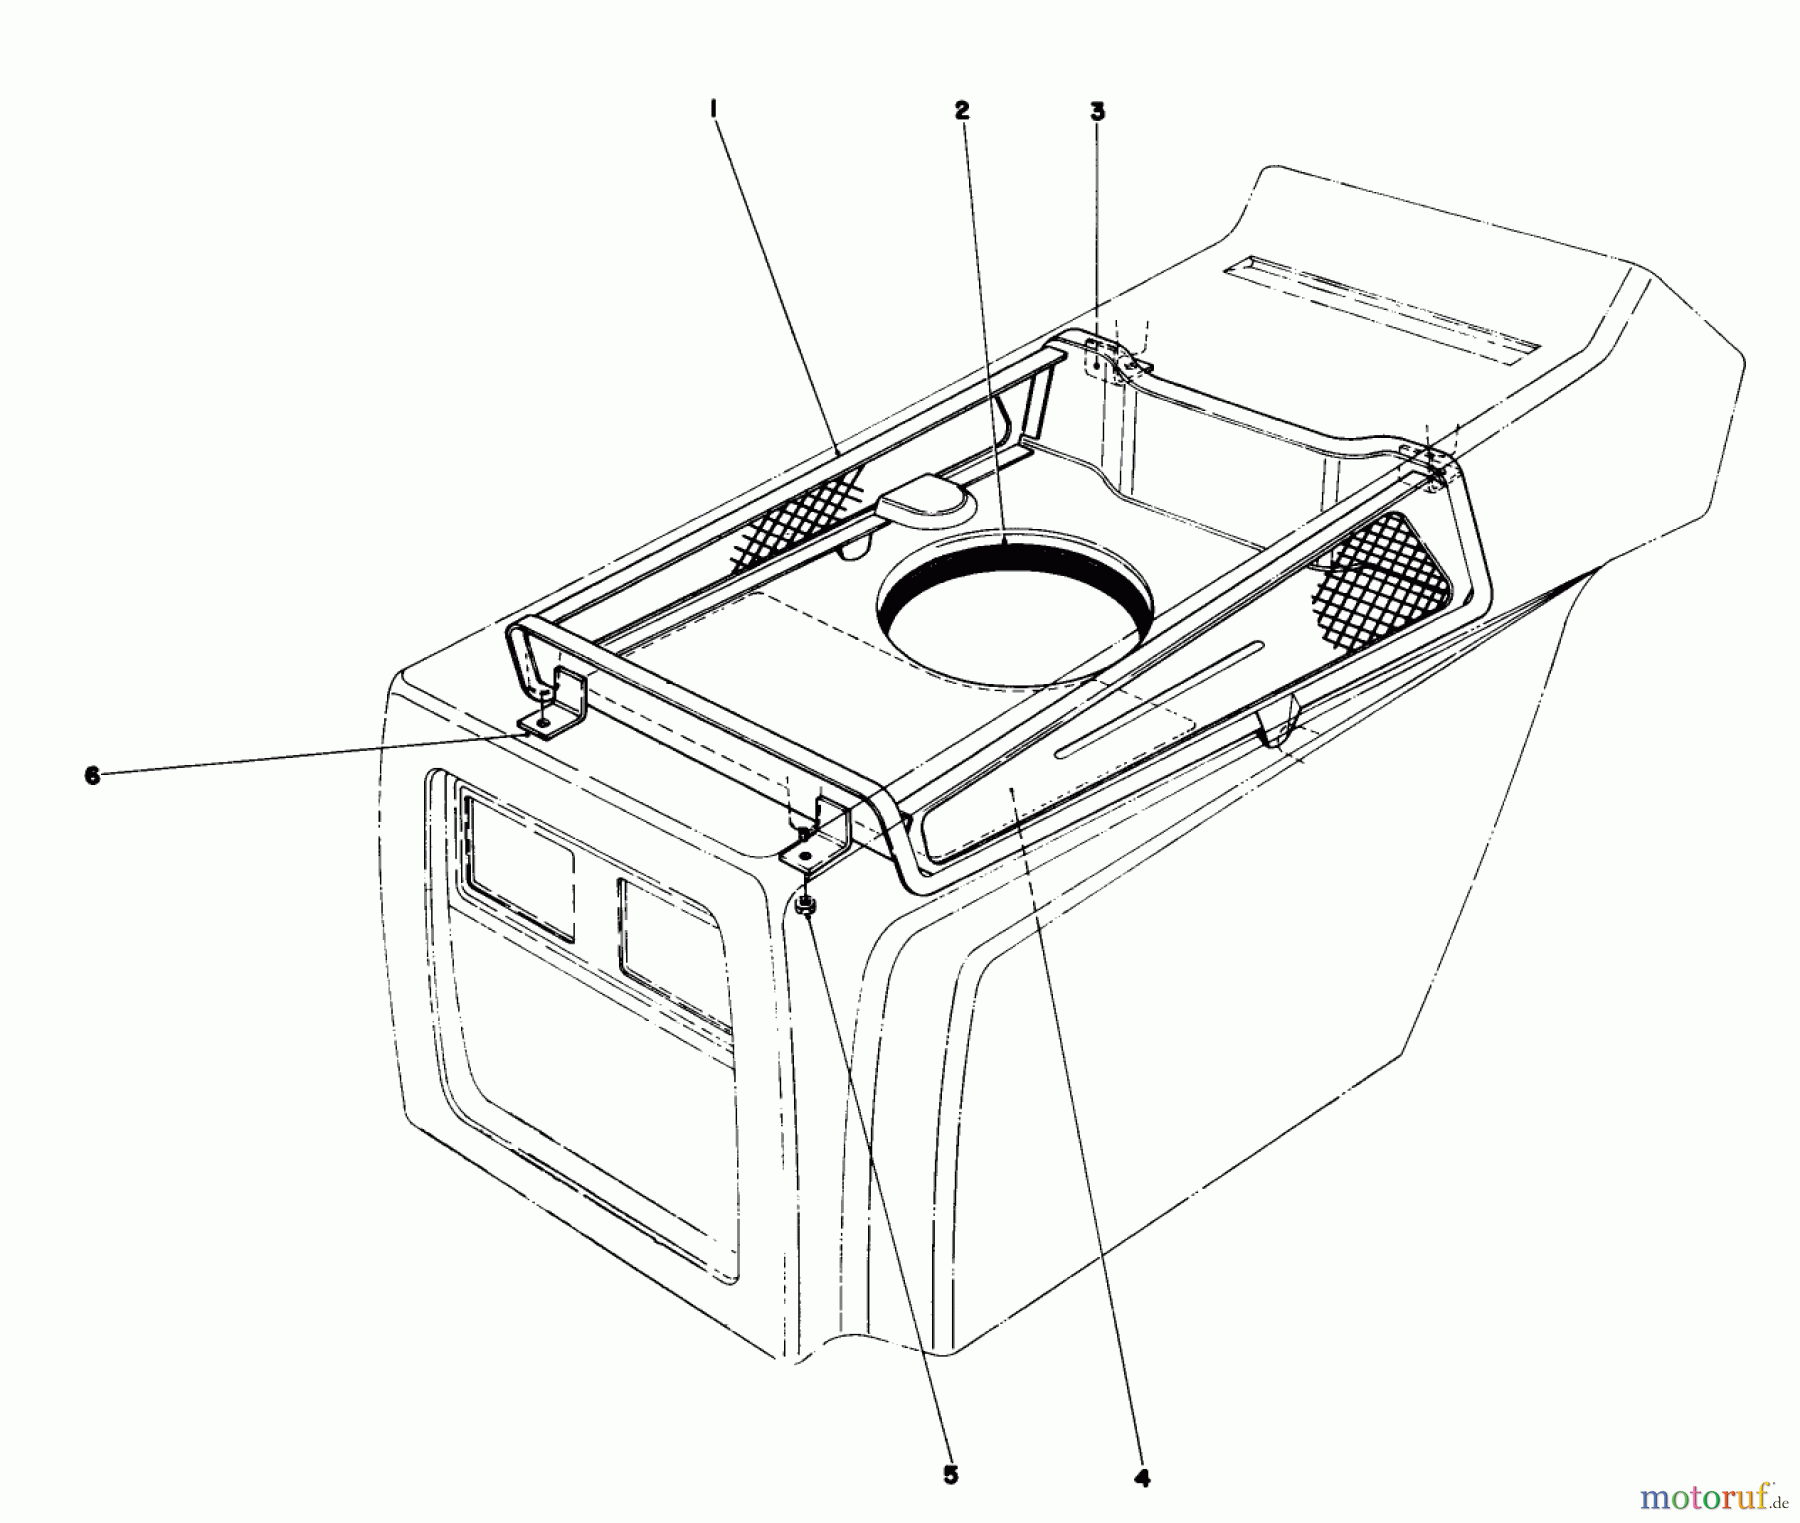  Toro Neu Mowers, Lawn & Garden Tractor Seite 1 57357 (11-44) - Toro 11-44 Lawn Tractor, 1984 (4000001-4999999) HOOD DUCT ASSEMBLY